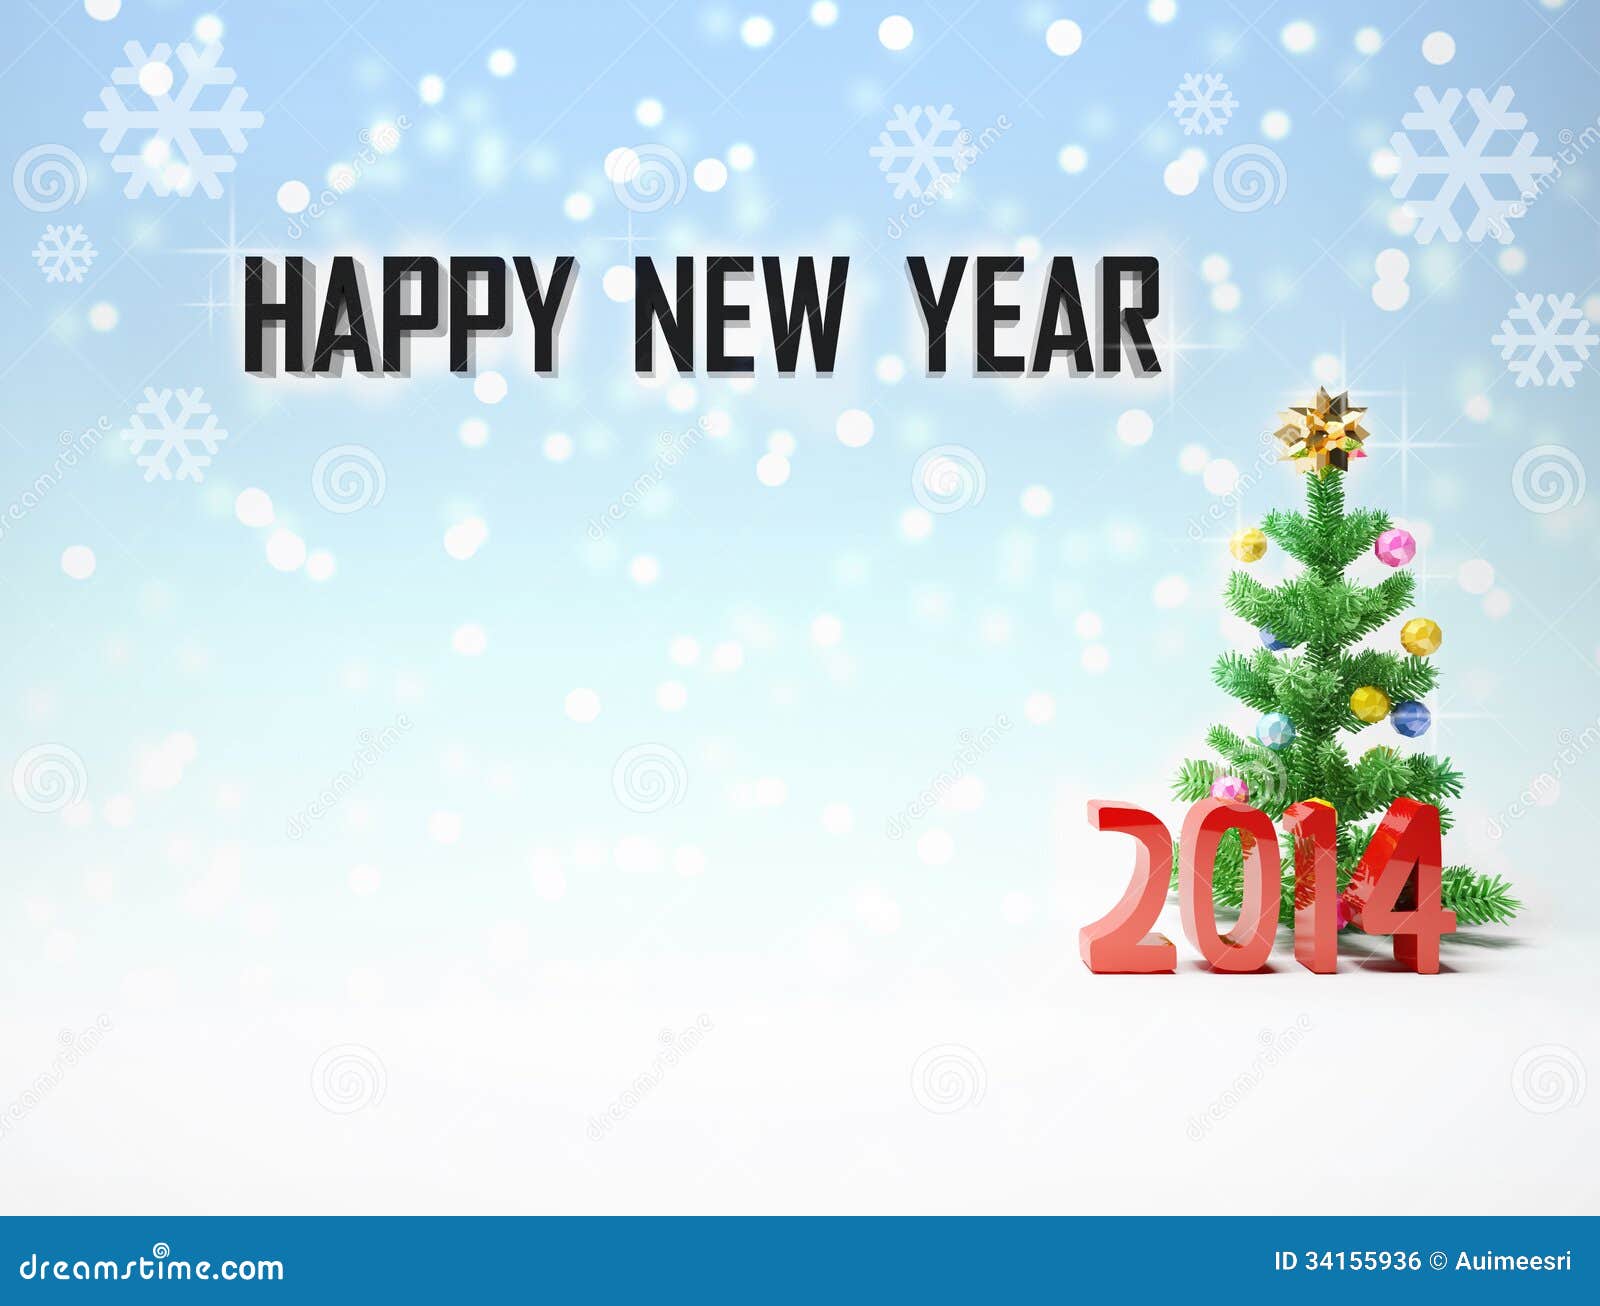 free animated clipart happy new year 2014 - photo #37